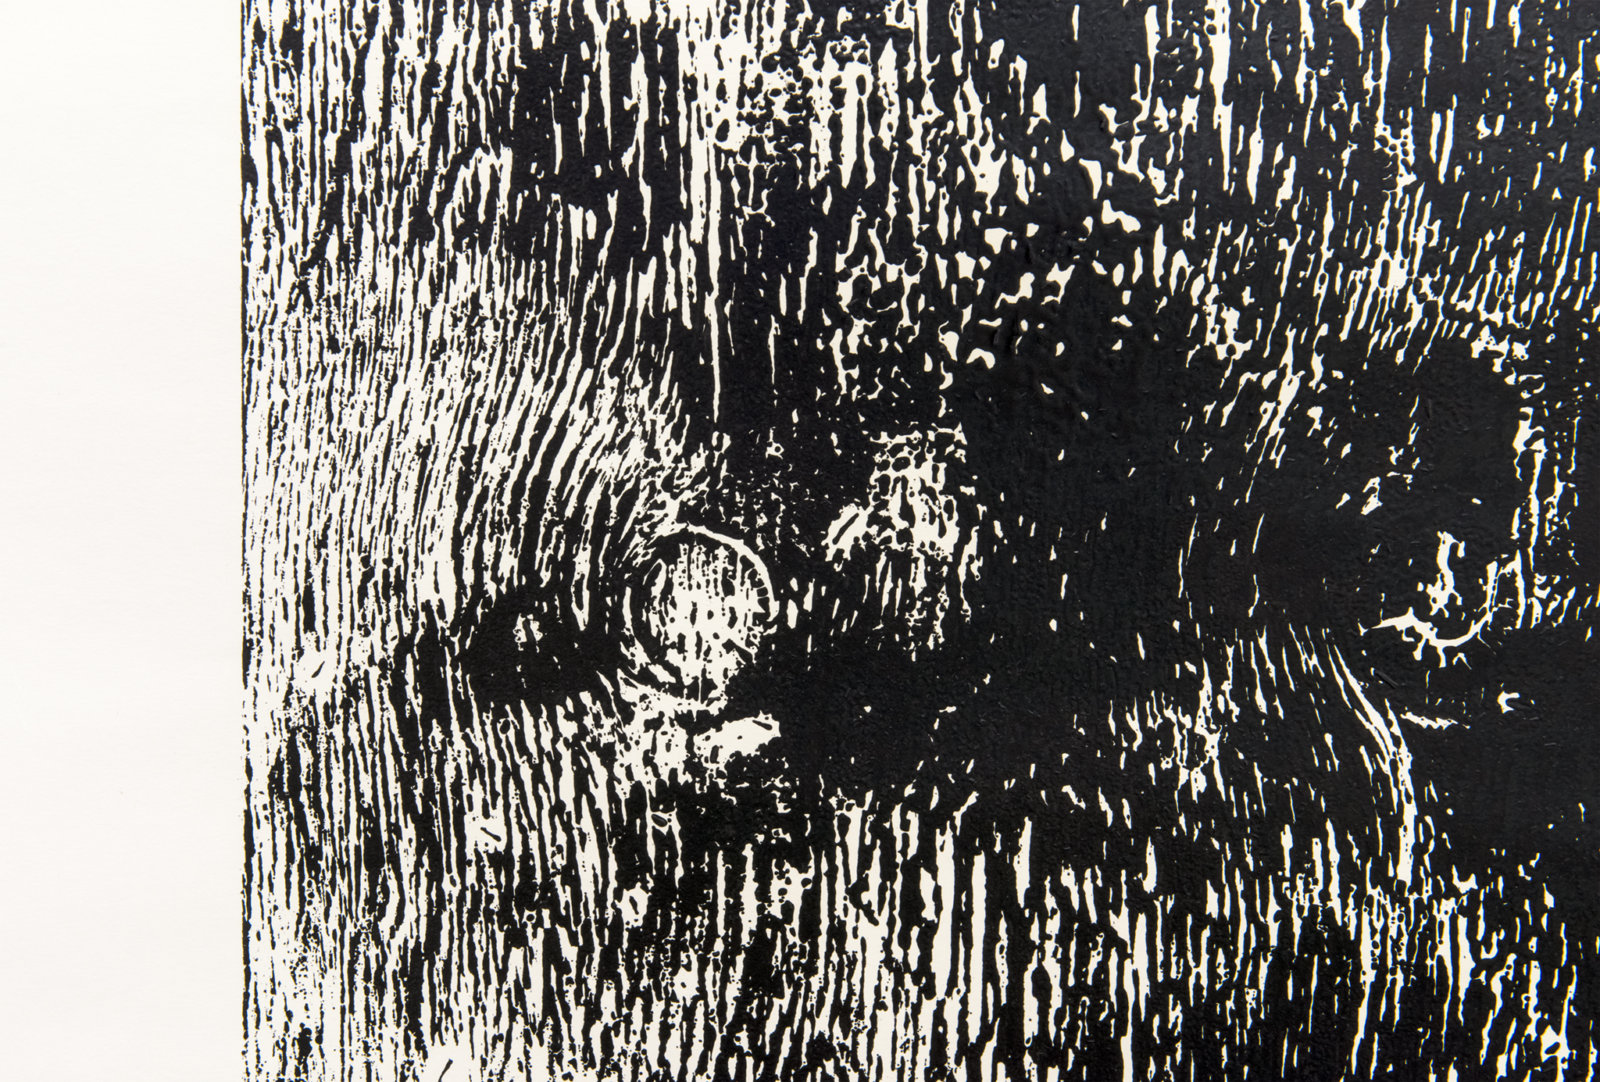 Ian Wallace, Untitled (Monoprint) (detail), 1990, ink on paper, 108 x 72 in. (274 x 183 cm)